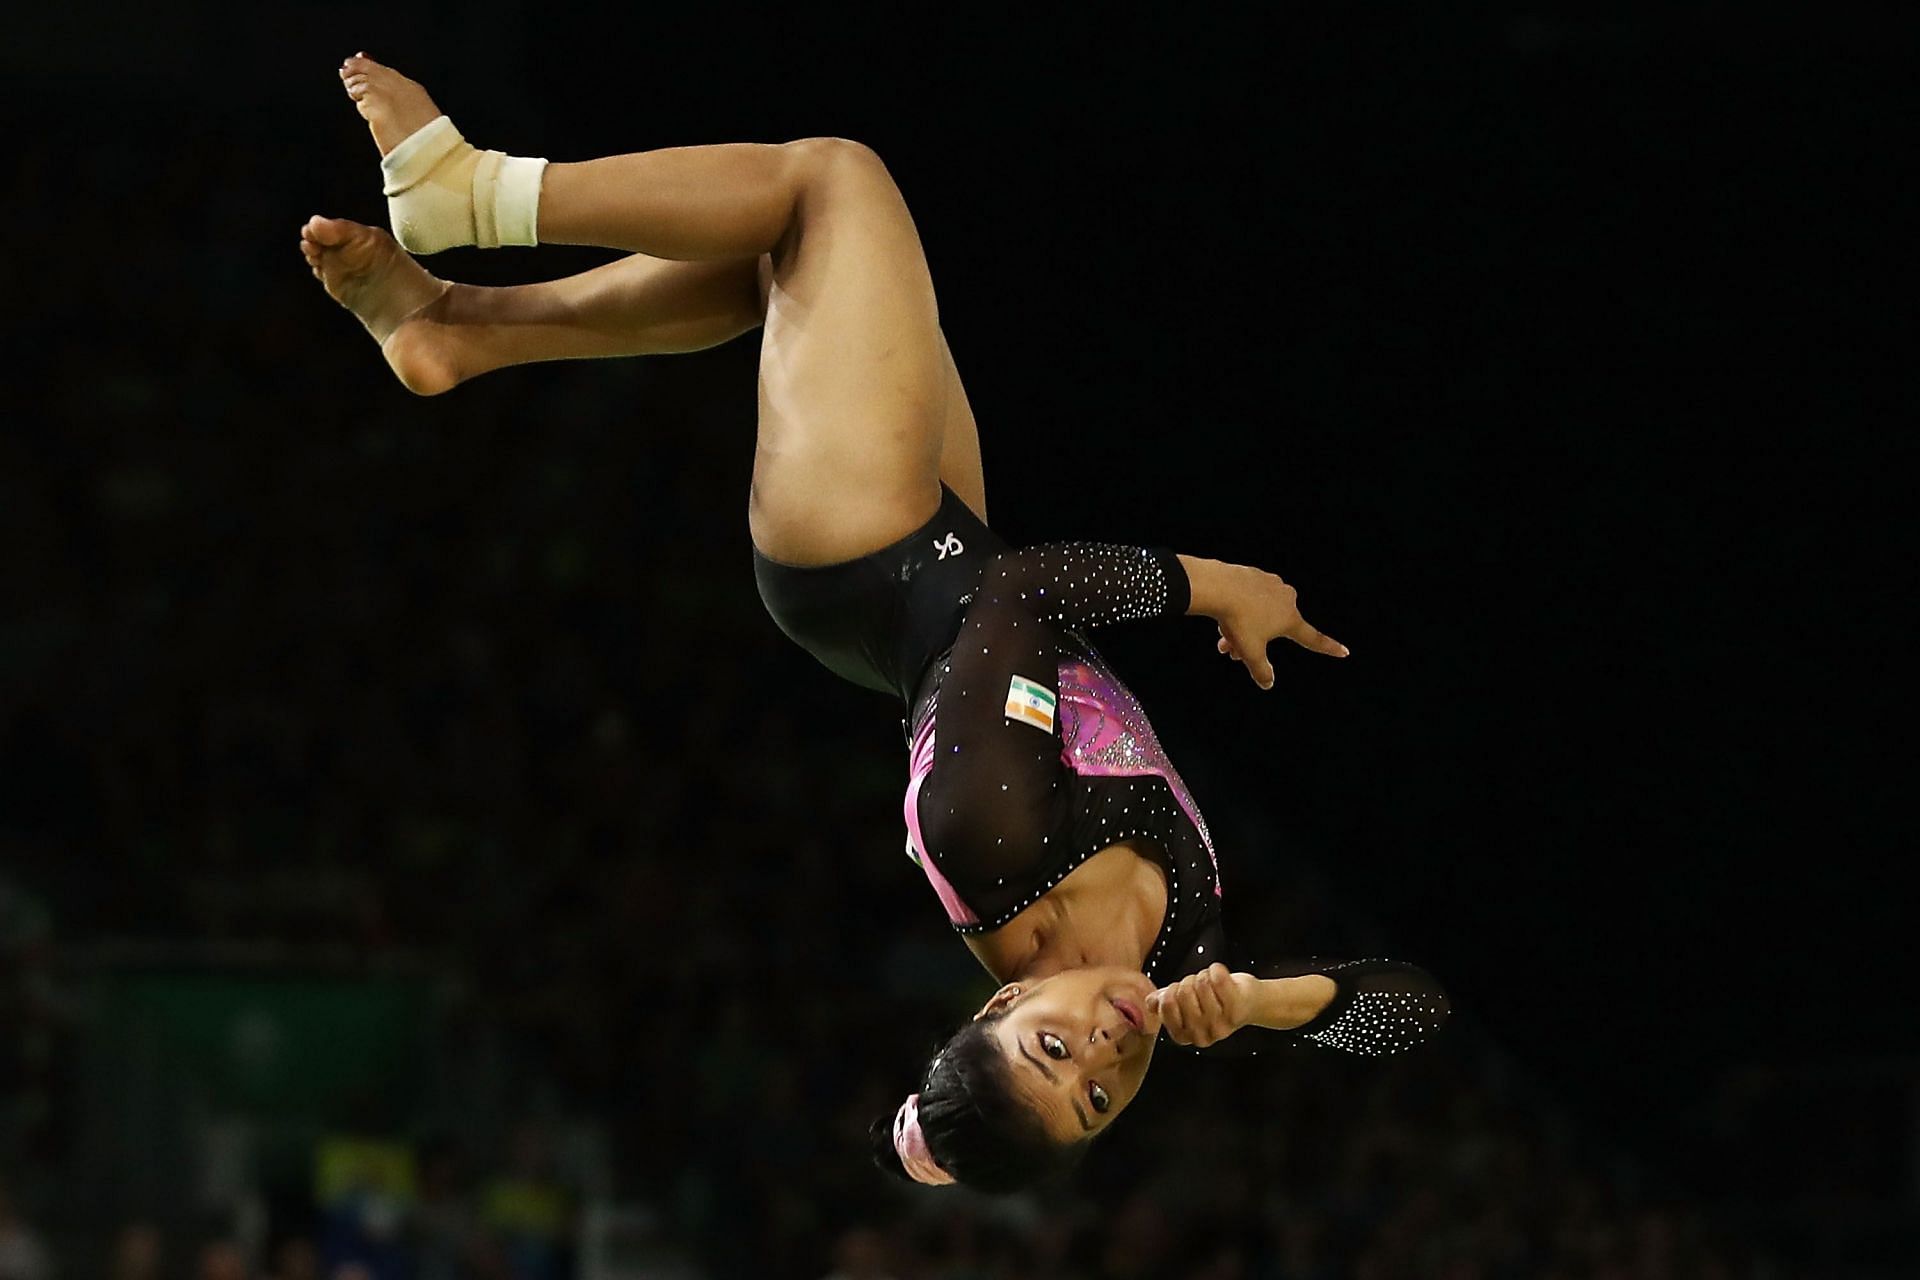 Pranati Nayak has now won back-to-back medals at the Asian Artistic Gymnastics Championships